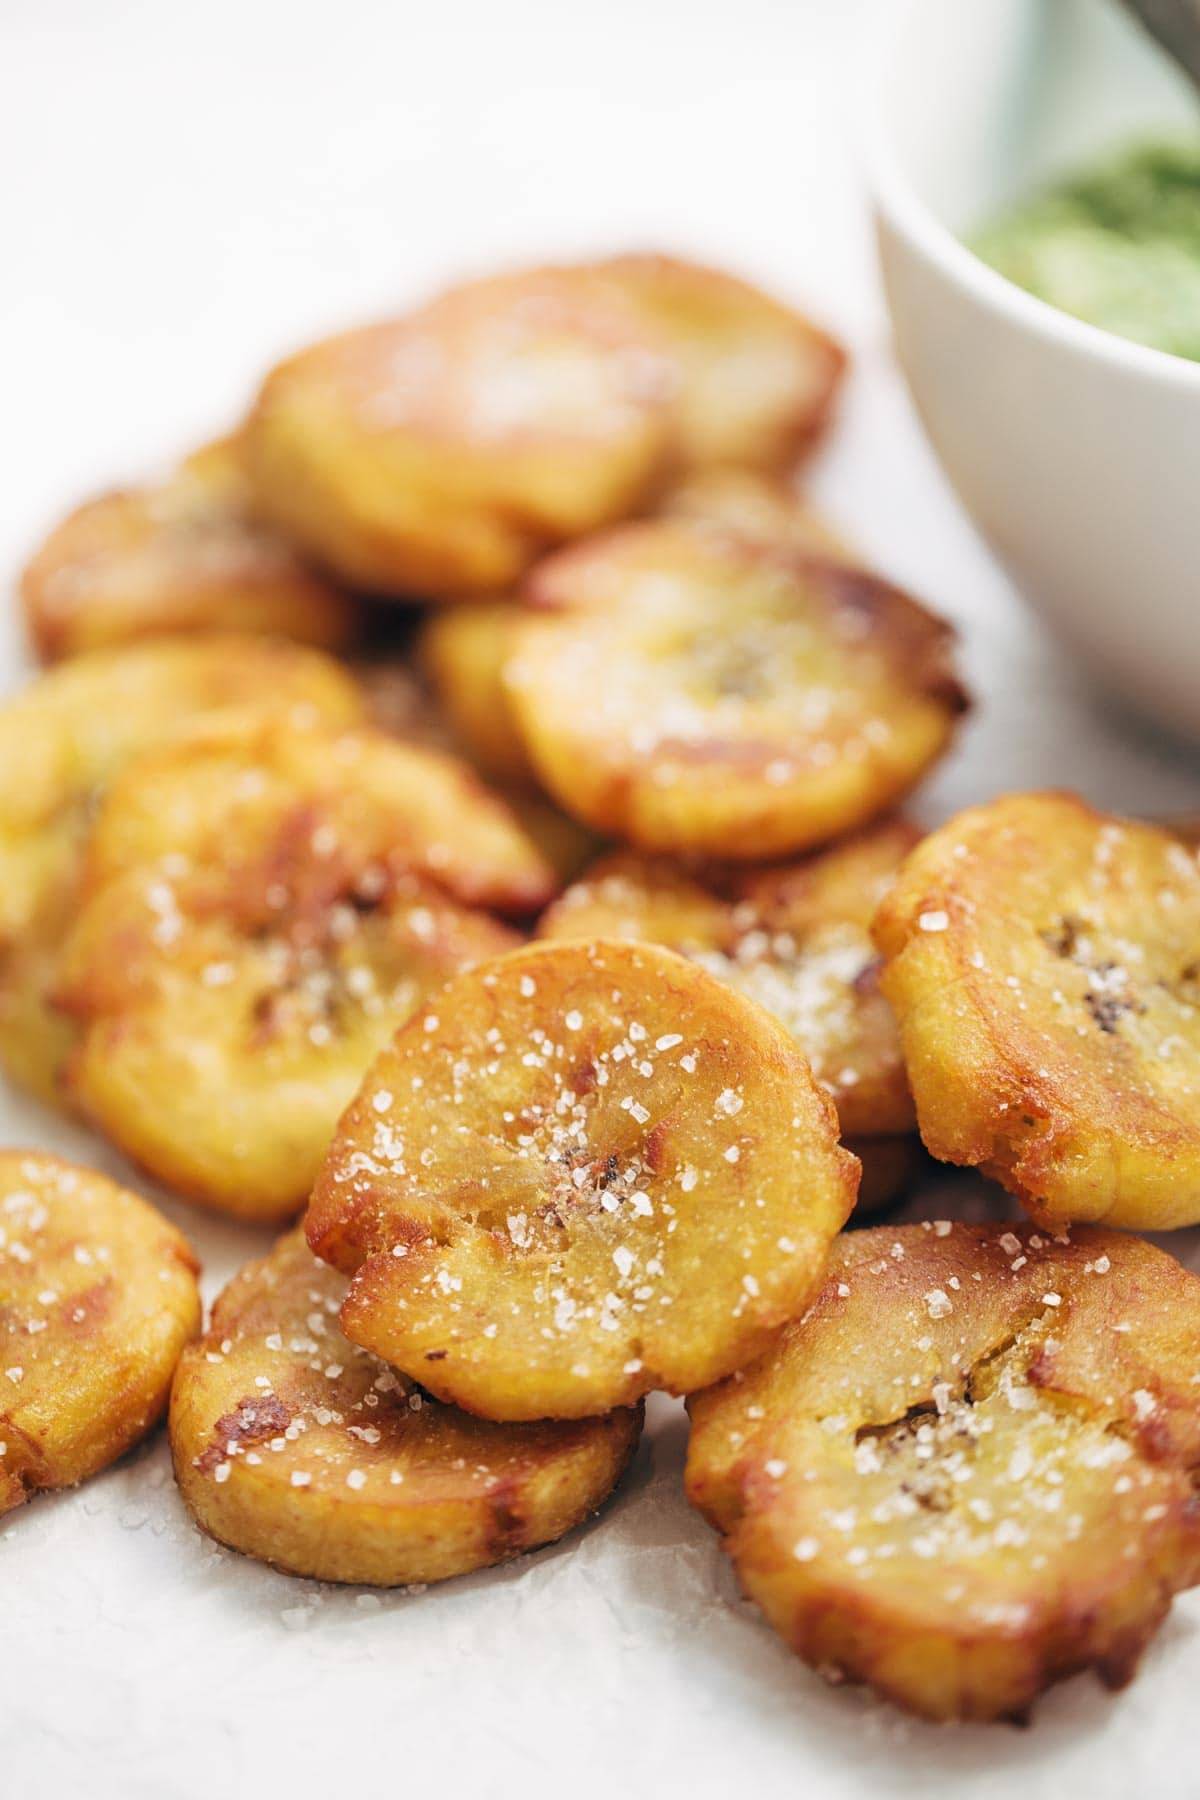 Crispy Salted Tostones - super easy recipe for golden brown bites of perfection with just one ingredient: PLANTAINS! video demo in the post. | pinchofyum.com